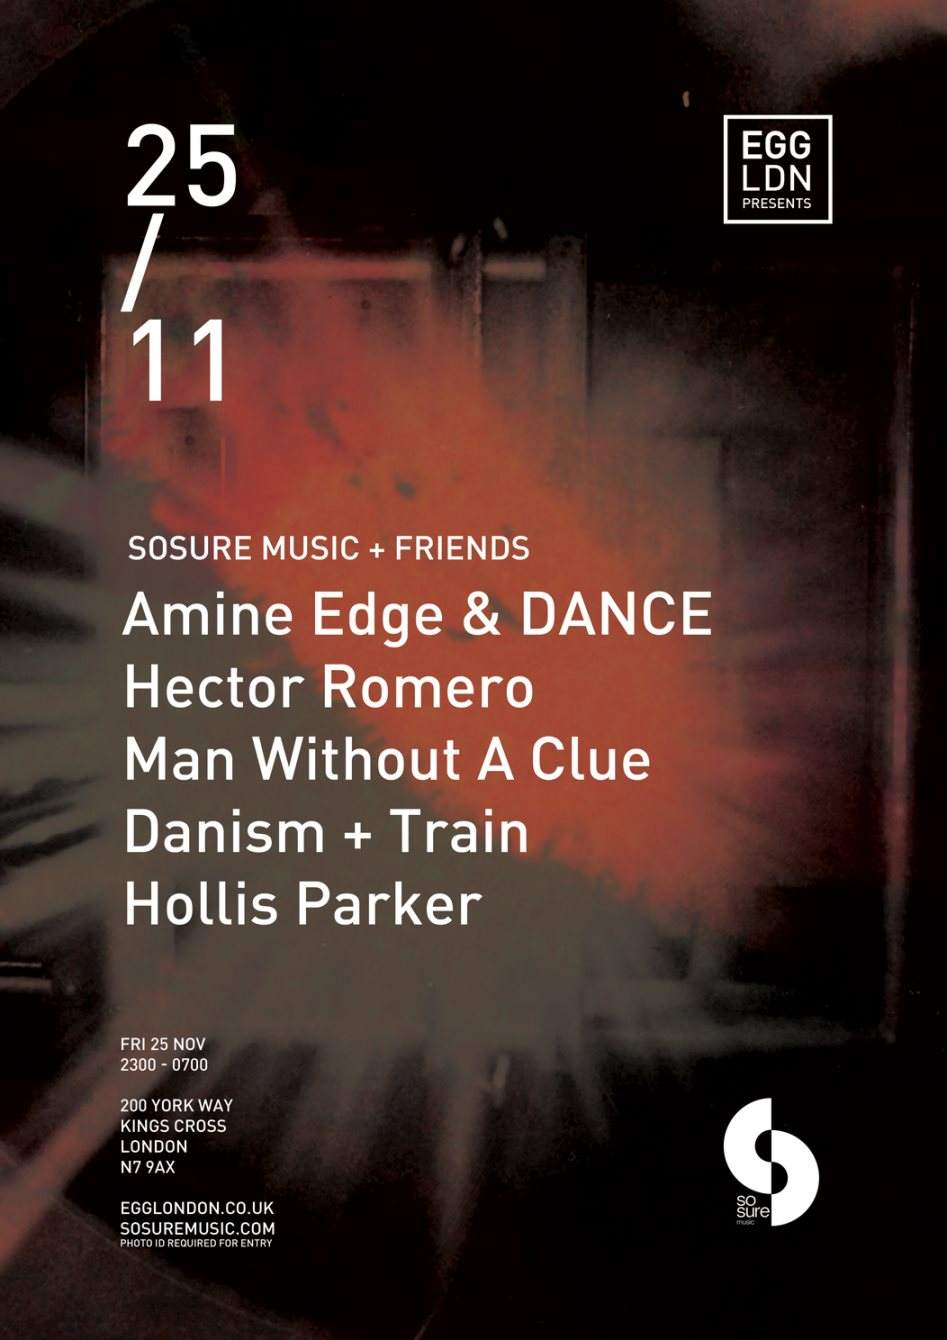 Egg presents: Sosure Music with Amine Edge & Dance, Hector Romero, Man Without A Clue - フライヤー表